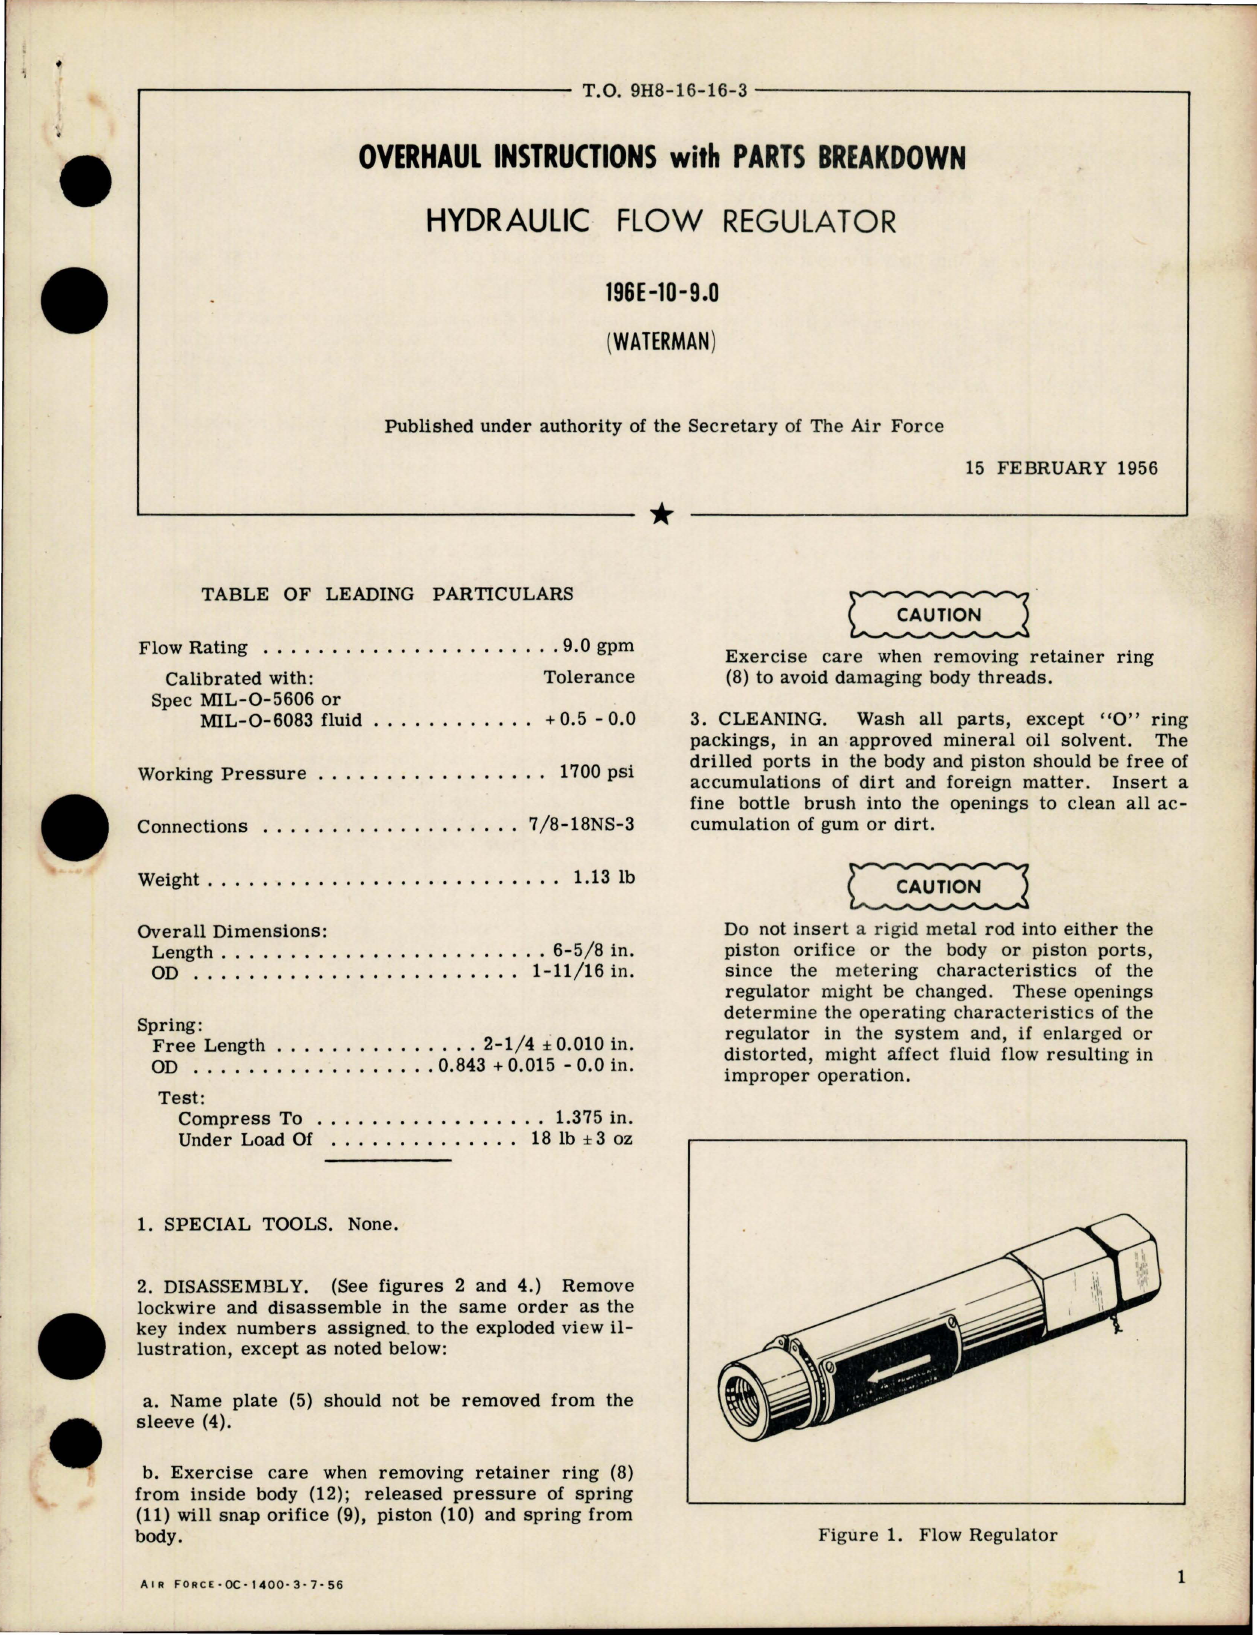 Sample page 1 from AirCorps Library document: Overhaul Instructions with Parts for Hydraulic Flow Regulator - 196E-10-9.0